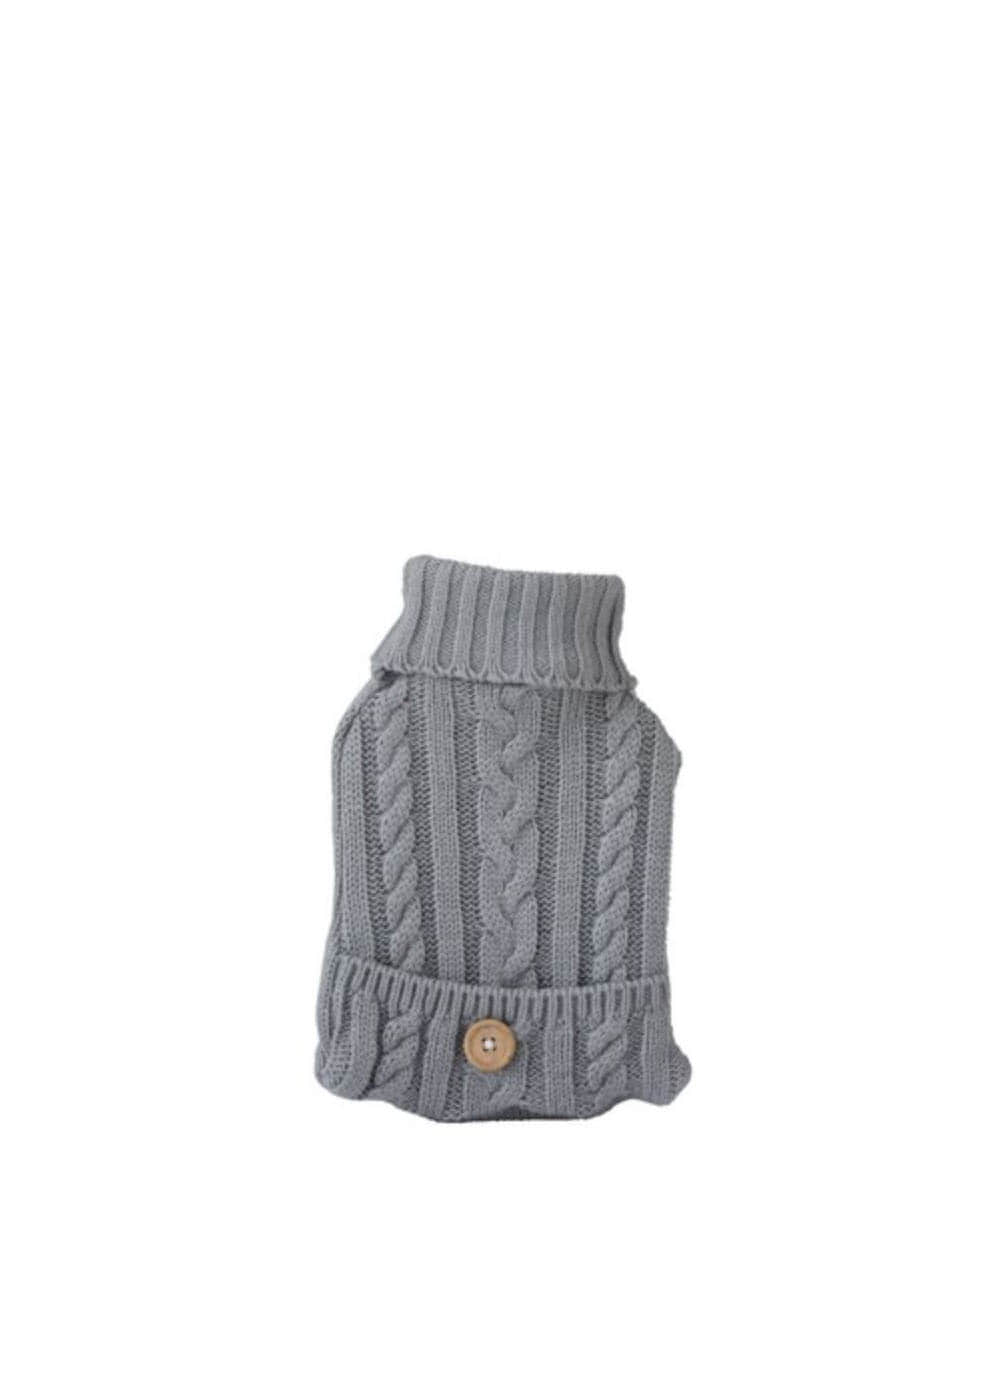 Pitcher Knitted Button Acrylic Grey